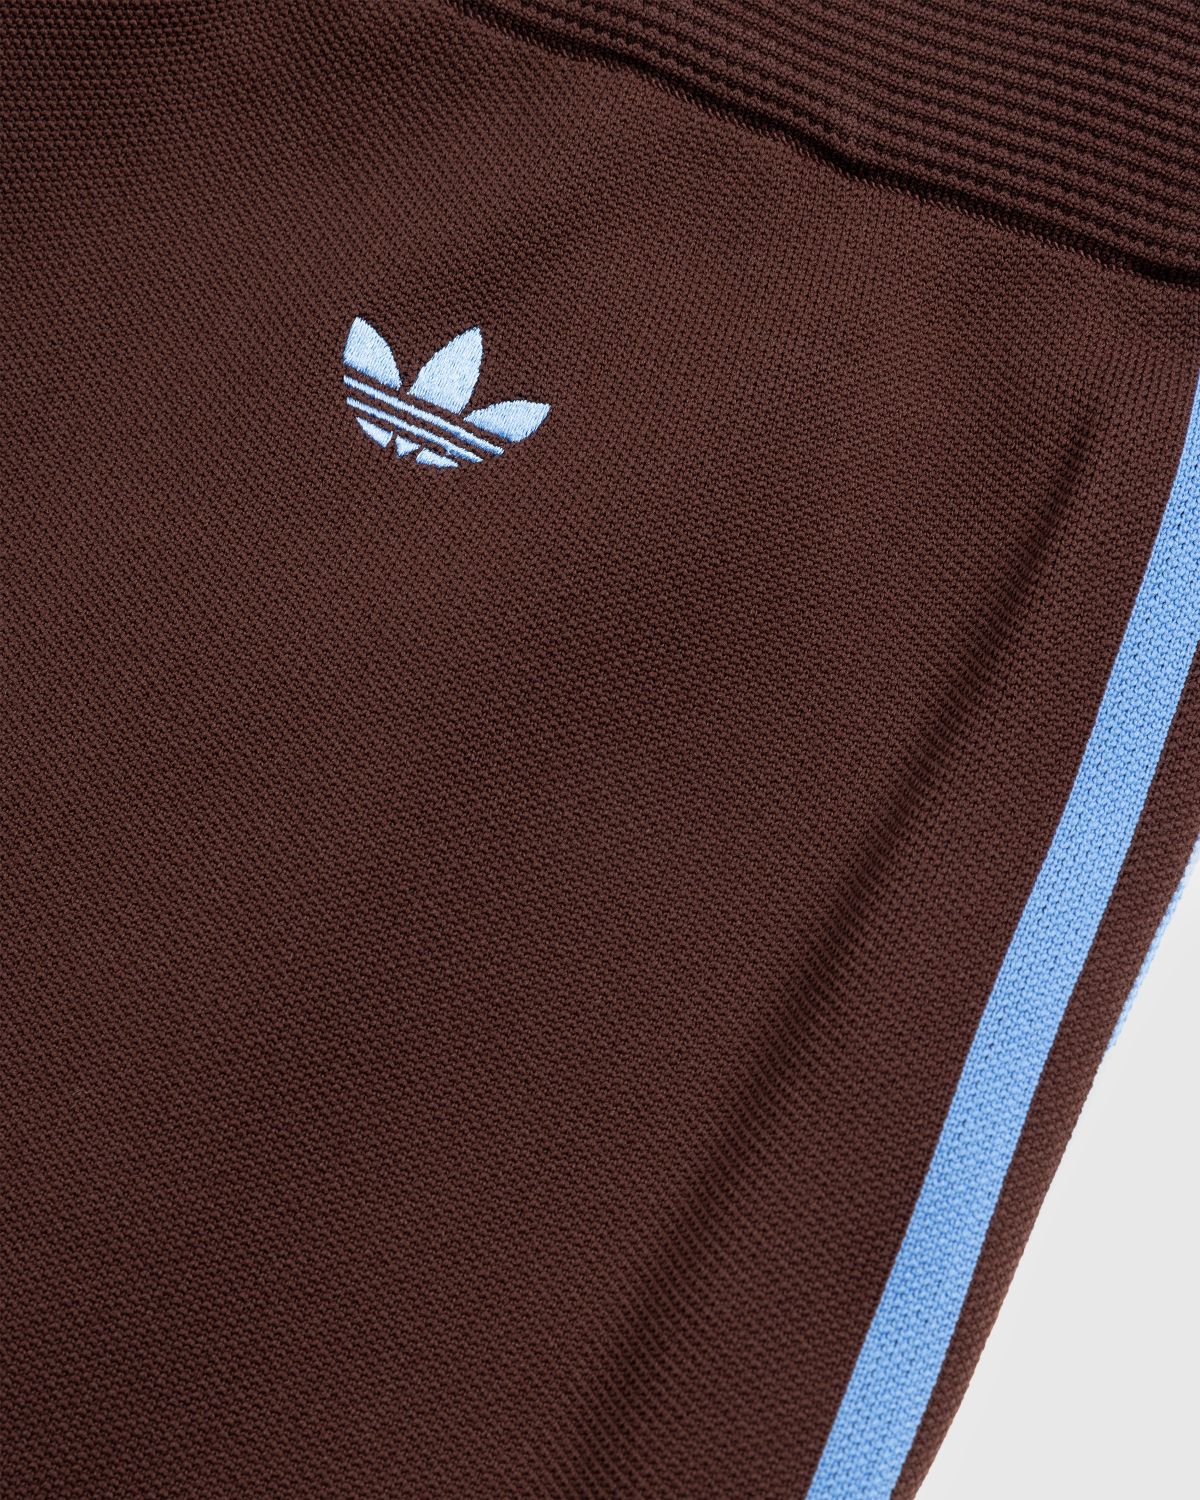 Adidas x Wales Bonner – Knit Track Pant Mystery Brown - Pants - Brown - Image 7